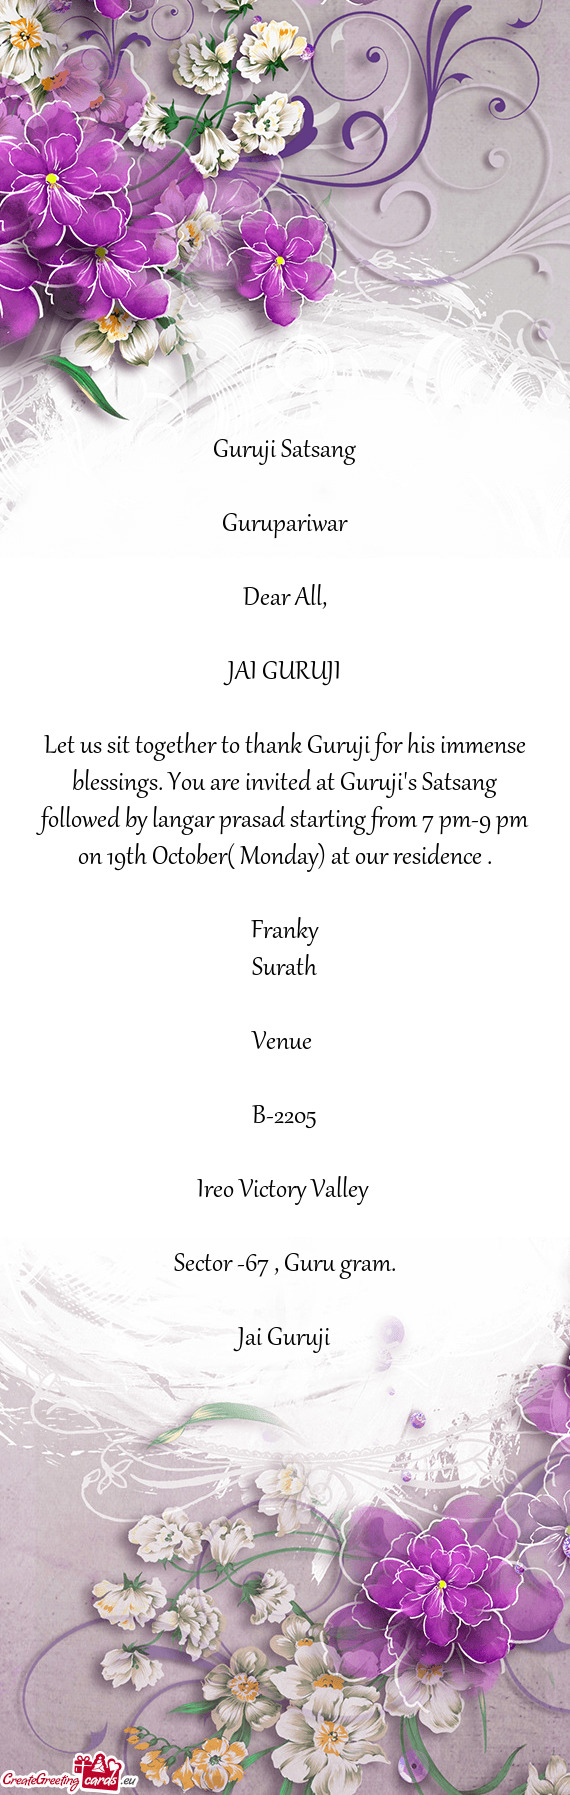 Ollowed by langar prasad starting from 7 pm-9 pm on 19th October( Monday) at our residence